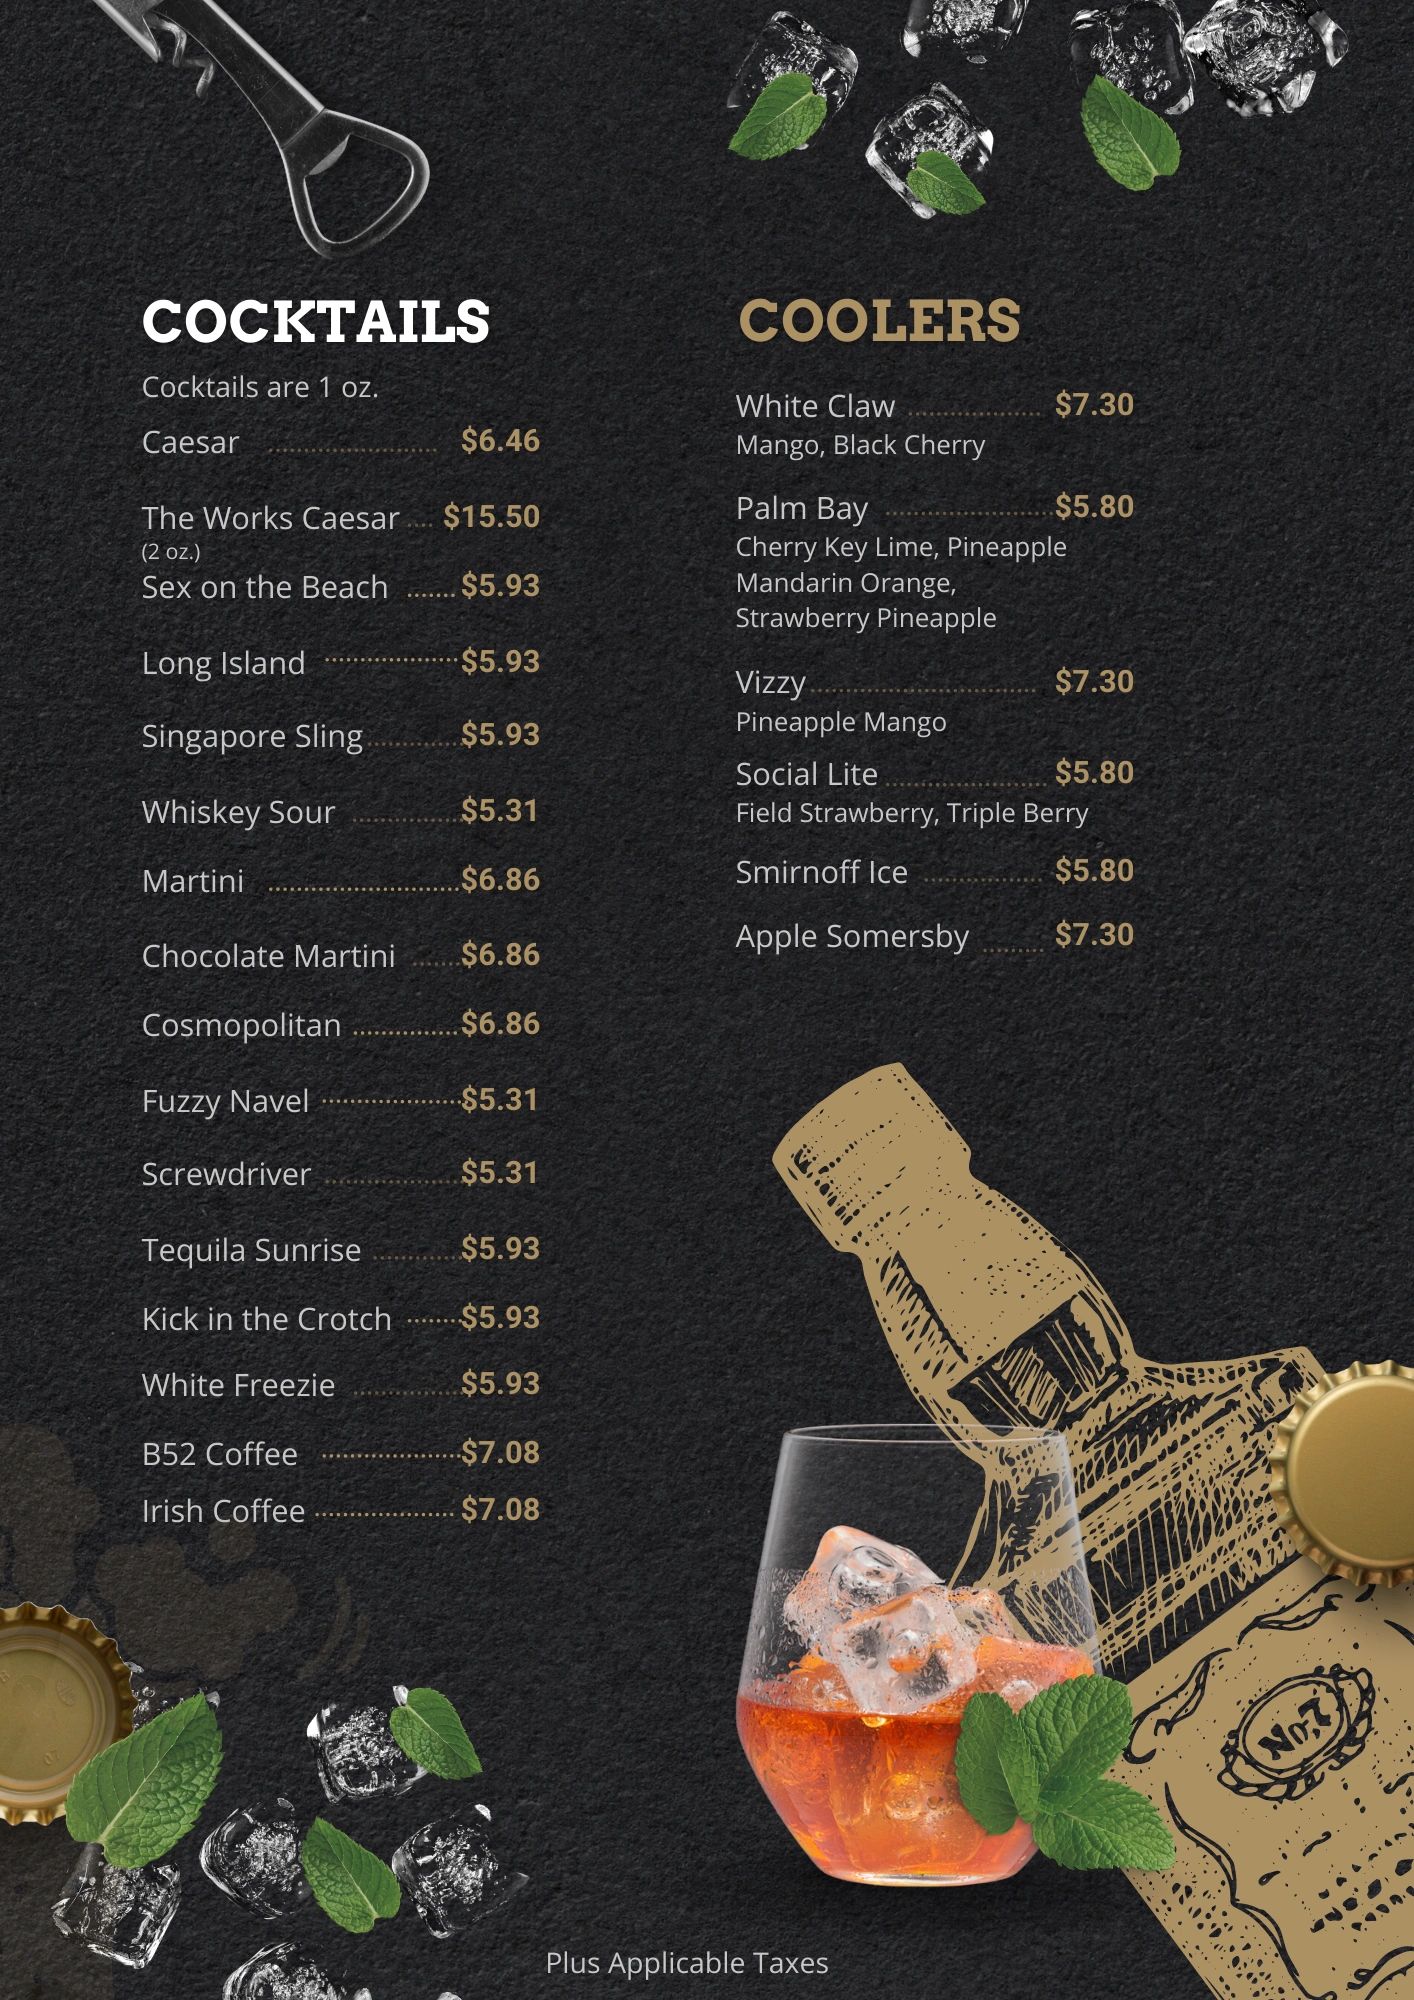 Cocktails and coolers